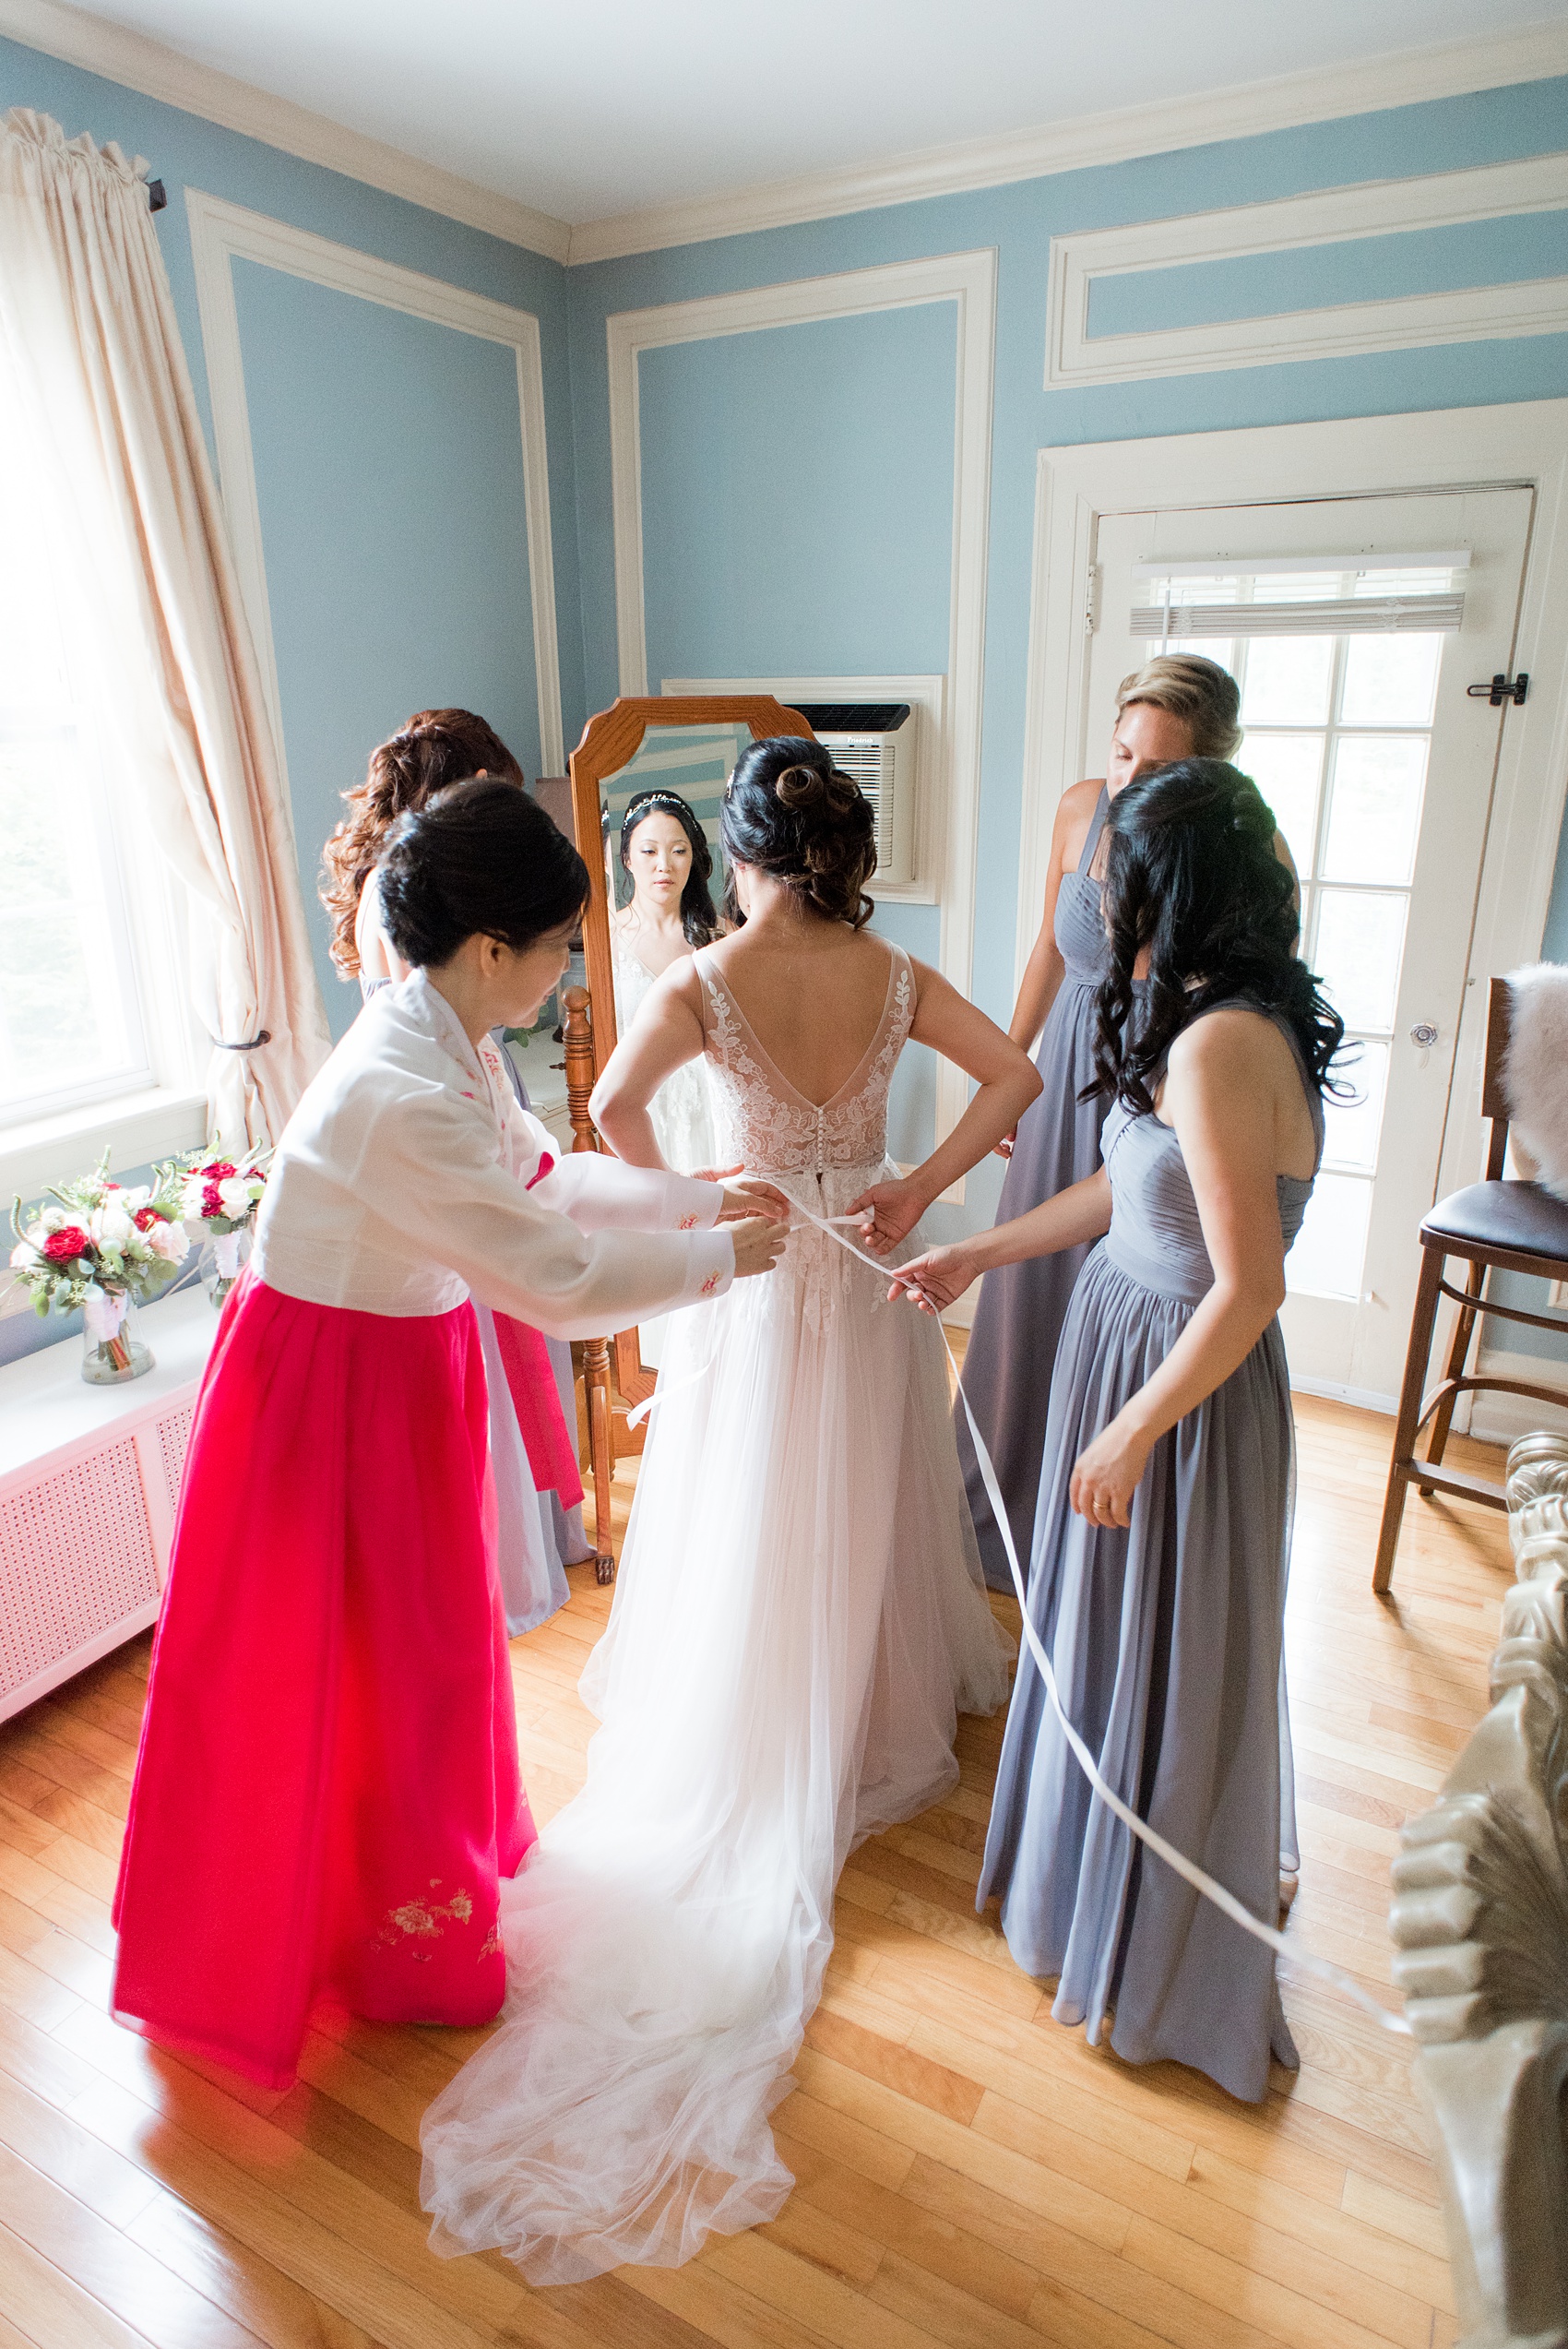 Wedding photos at Crabtree's Kittle House in Chappaqua, New York by Mikkel Paige Photography. The bride, her mother and bridesmaids got ready on location at this Westchester County historic home. Click through to see more photos from this gorgeous day! #mikkelpaige #CrabtreesKittleHouse #AsianWeddingTraditions #WestchesterWeddingVenues #WestchesterWedding #summerwedding #weddingdetails #bride #gettingready #weddinggettingready #historichome 